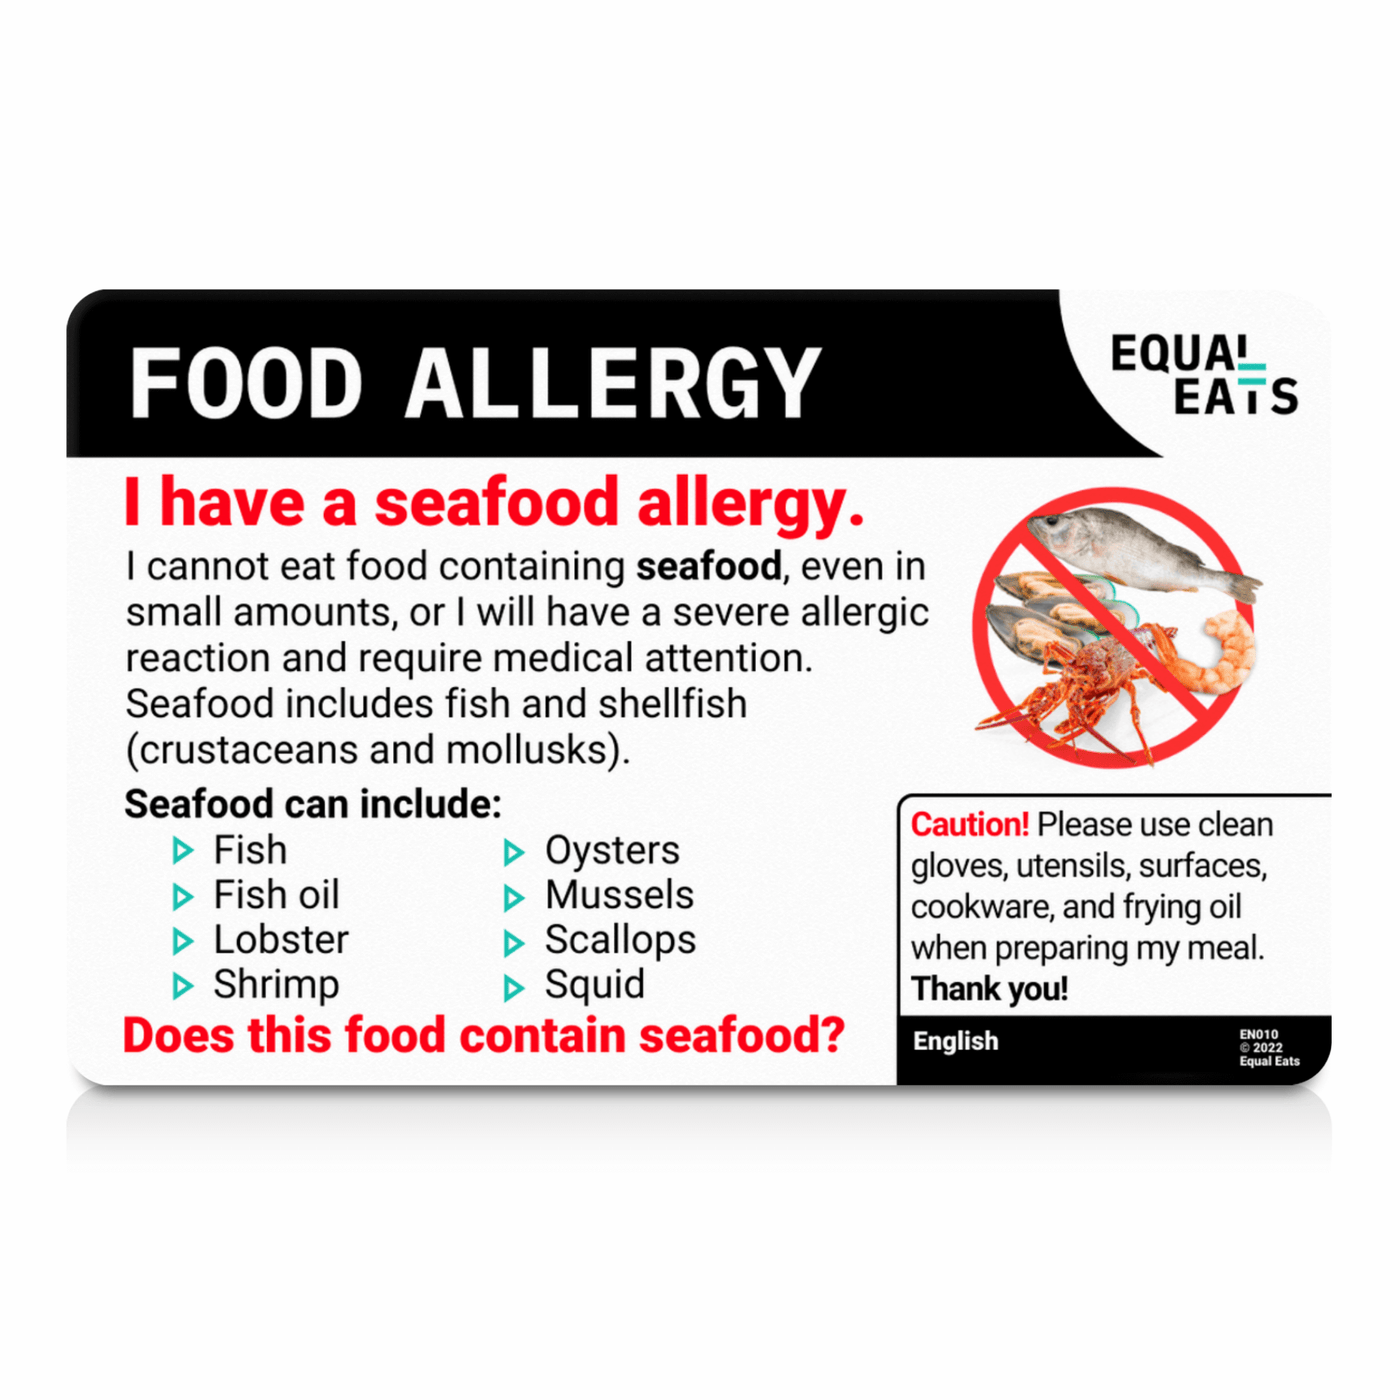 English Seafood Allergy Card